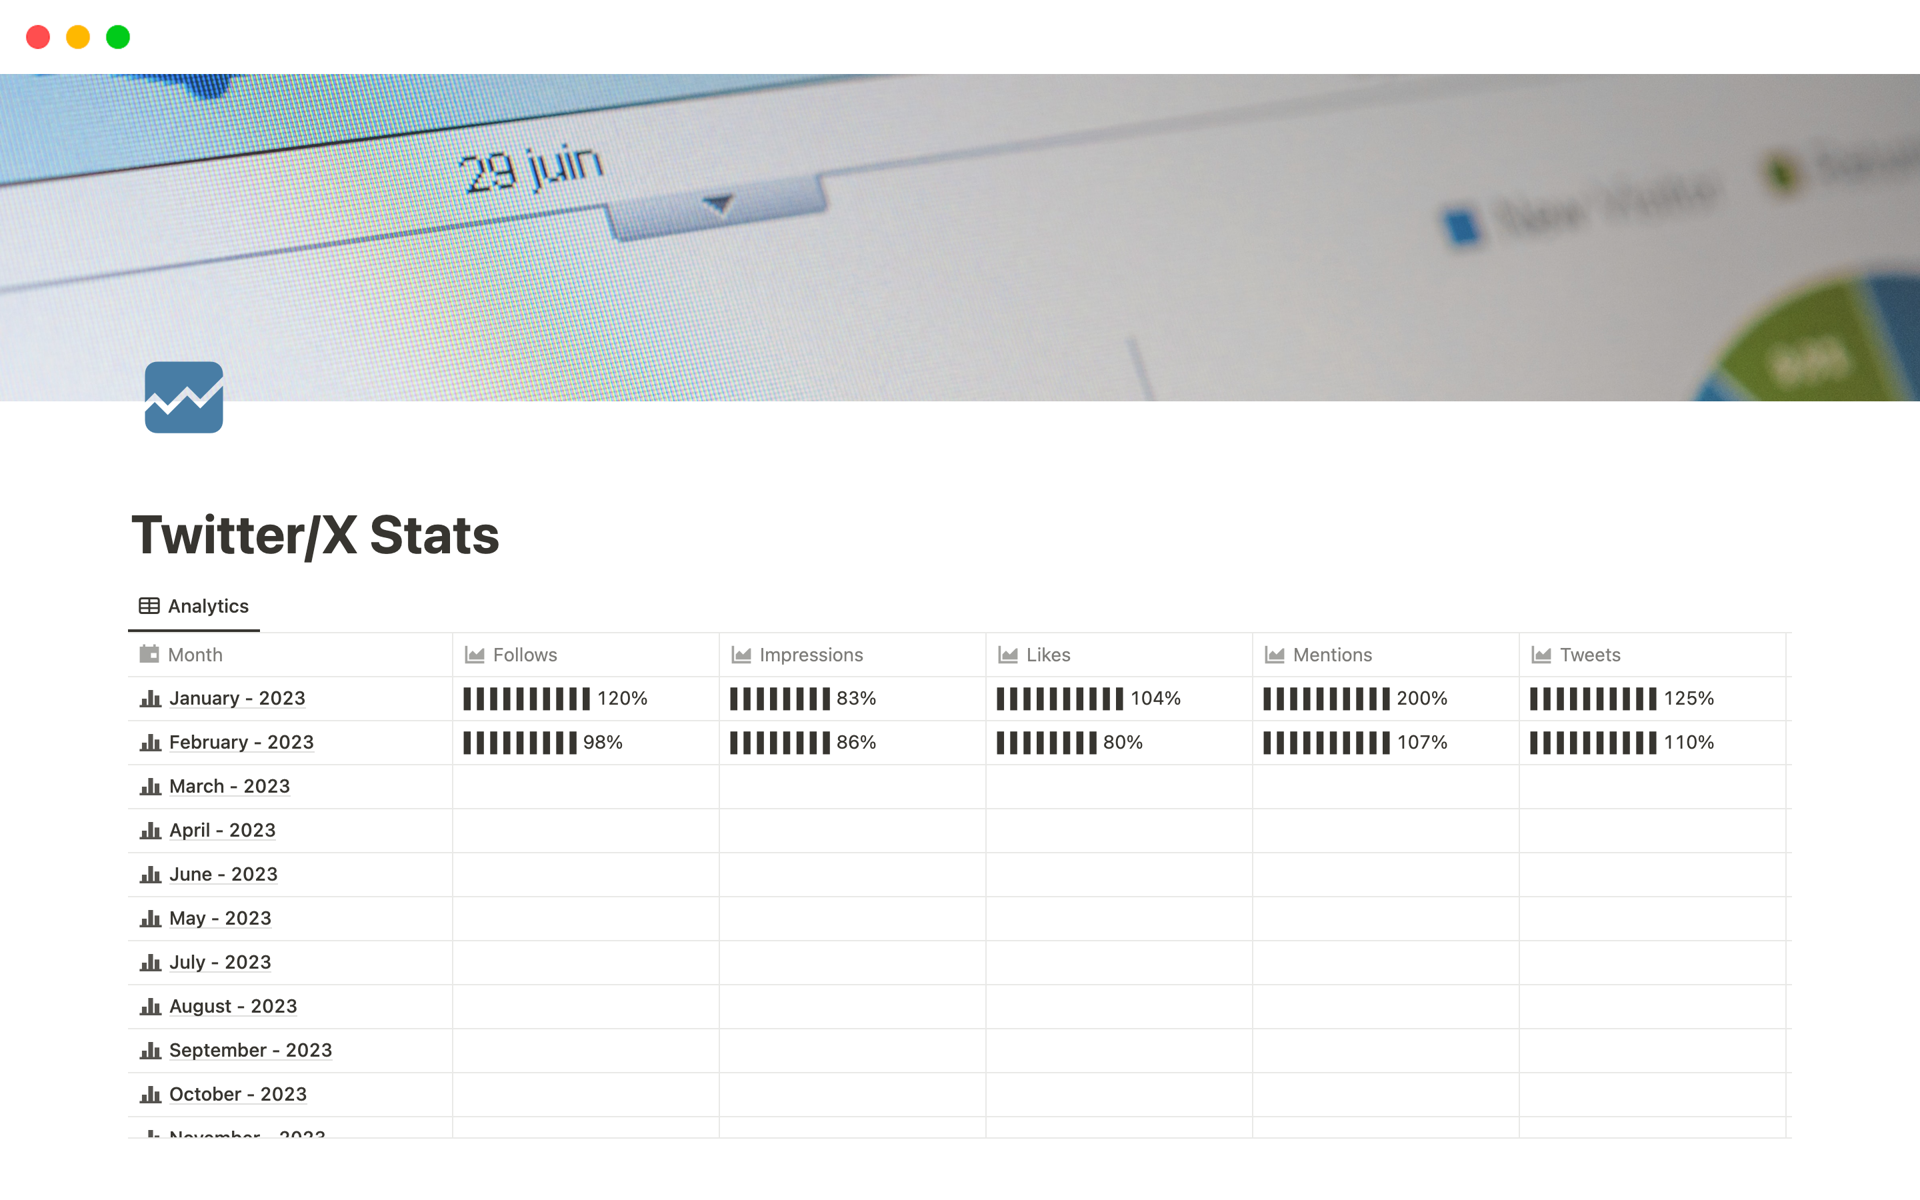 Control in Notion your Twitter/X Statistics, have your own Analytics, include goals, track the results graphically, all in a simple organized way!